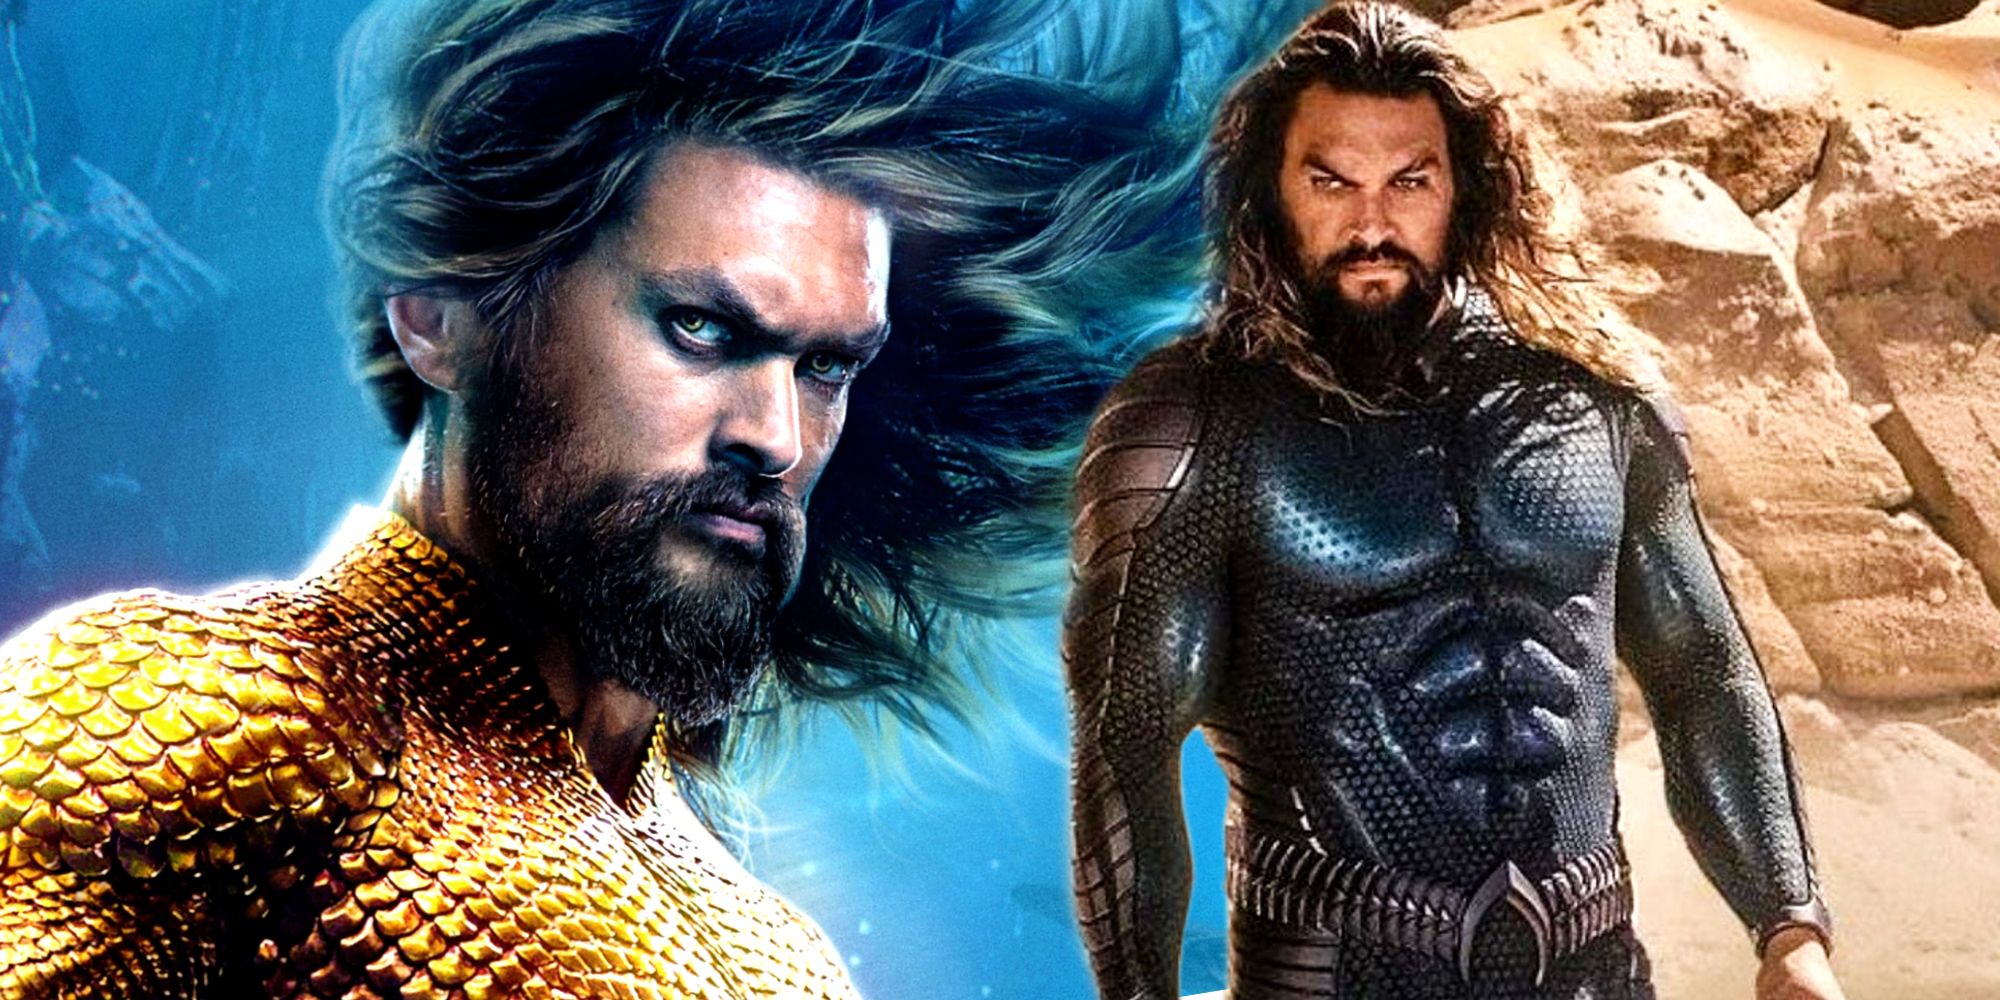 Jason Momoa as Arthur Curry Jr in Aquaman and the Lost Kingdom